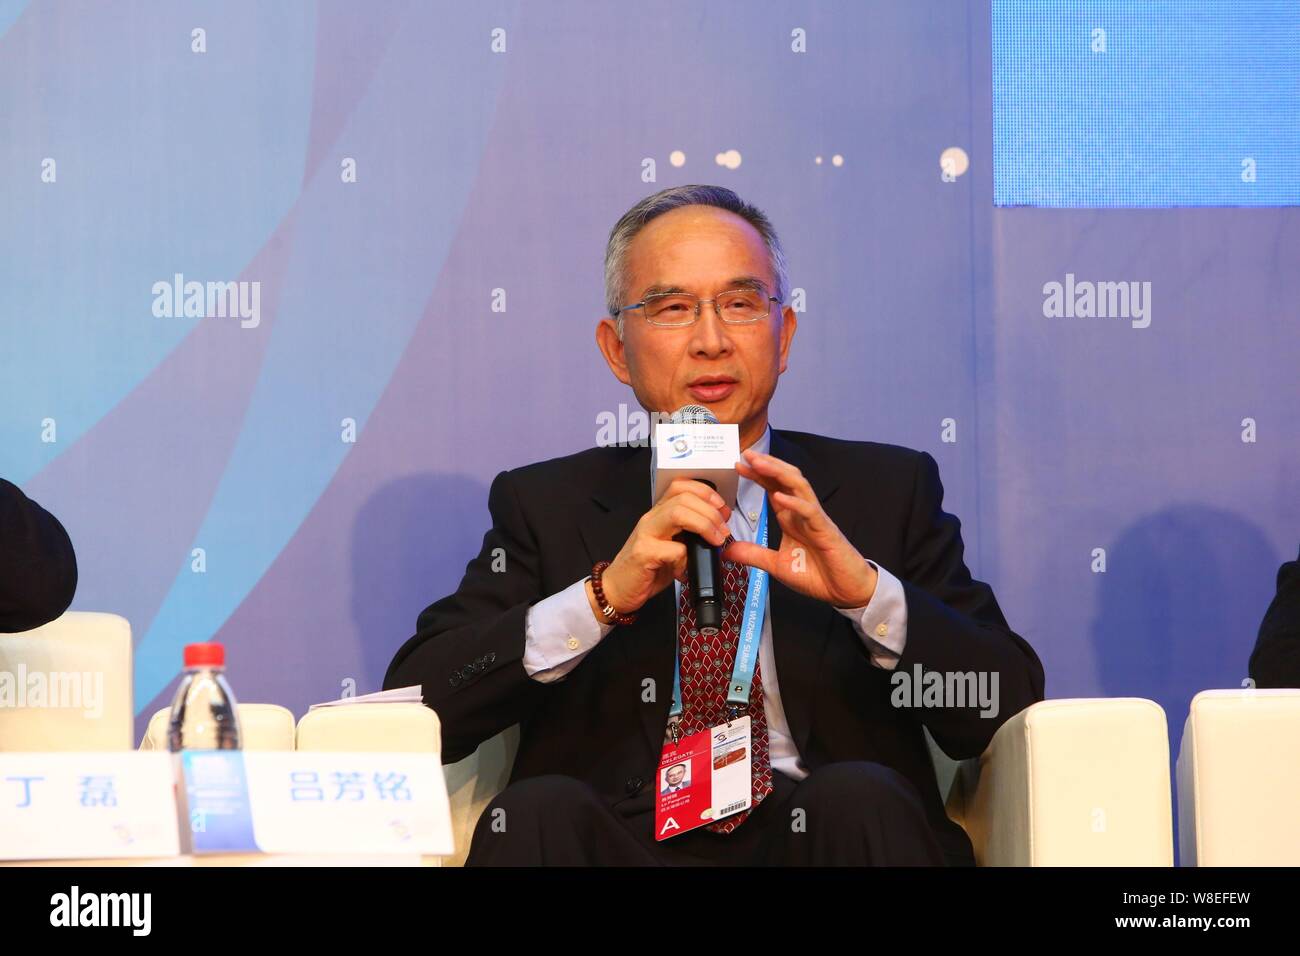 Lu Fangming, Chairman of Asia Pacific Telecom and Vice Chairman of Hon Hai Precision, speaks at a forum during the 2nd World Internet Conference, also Stock Photo